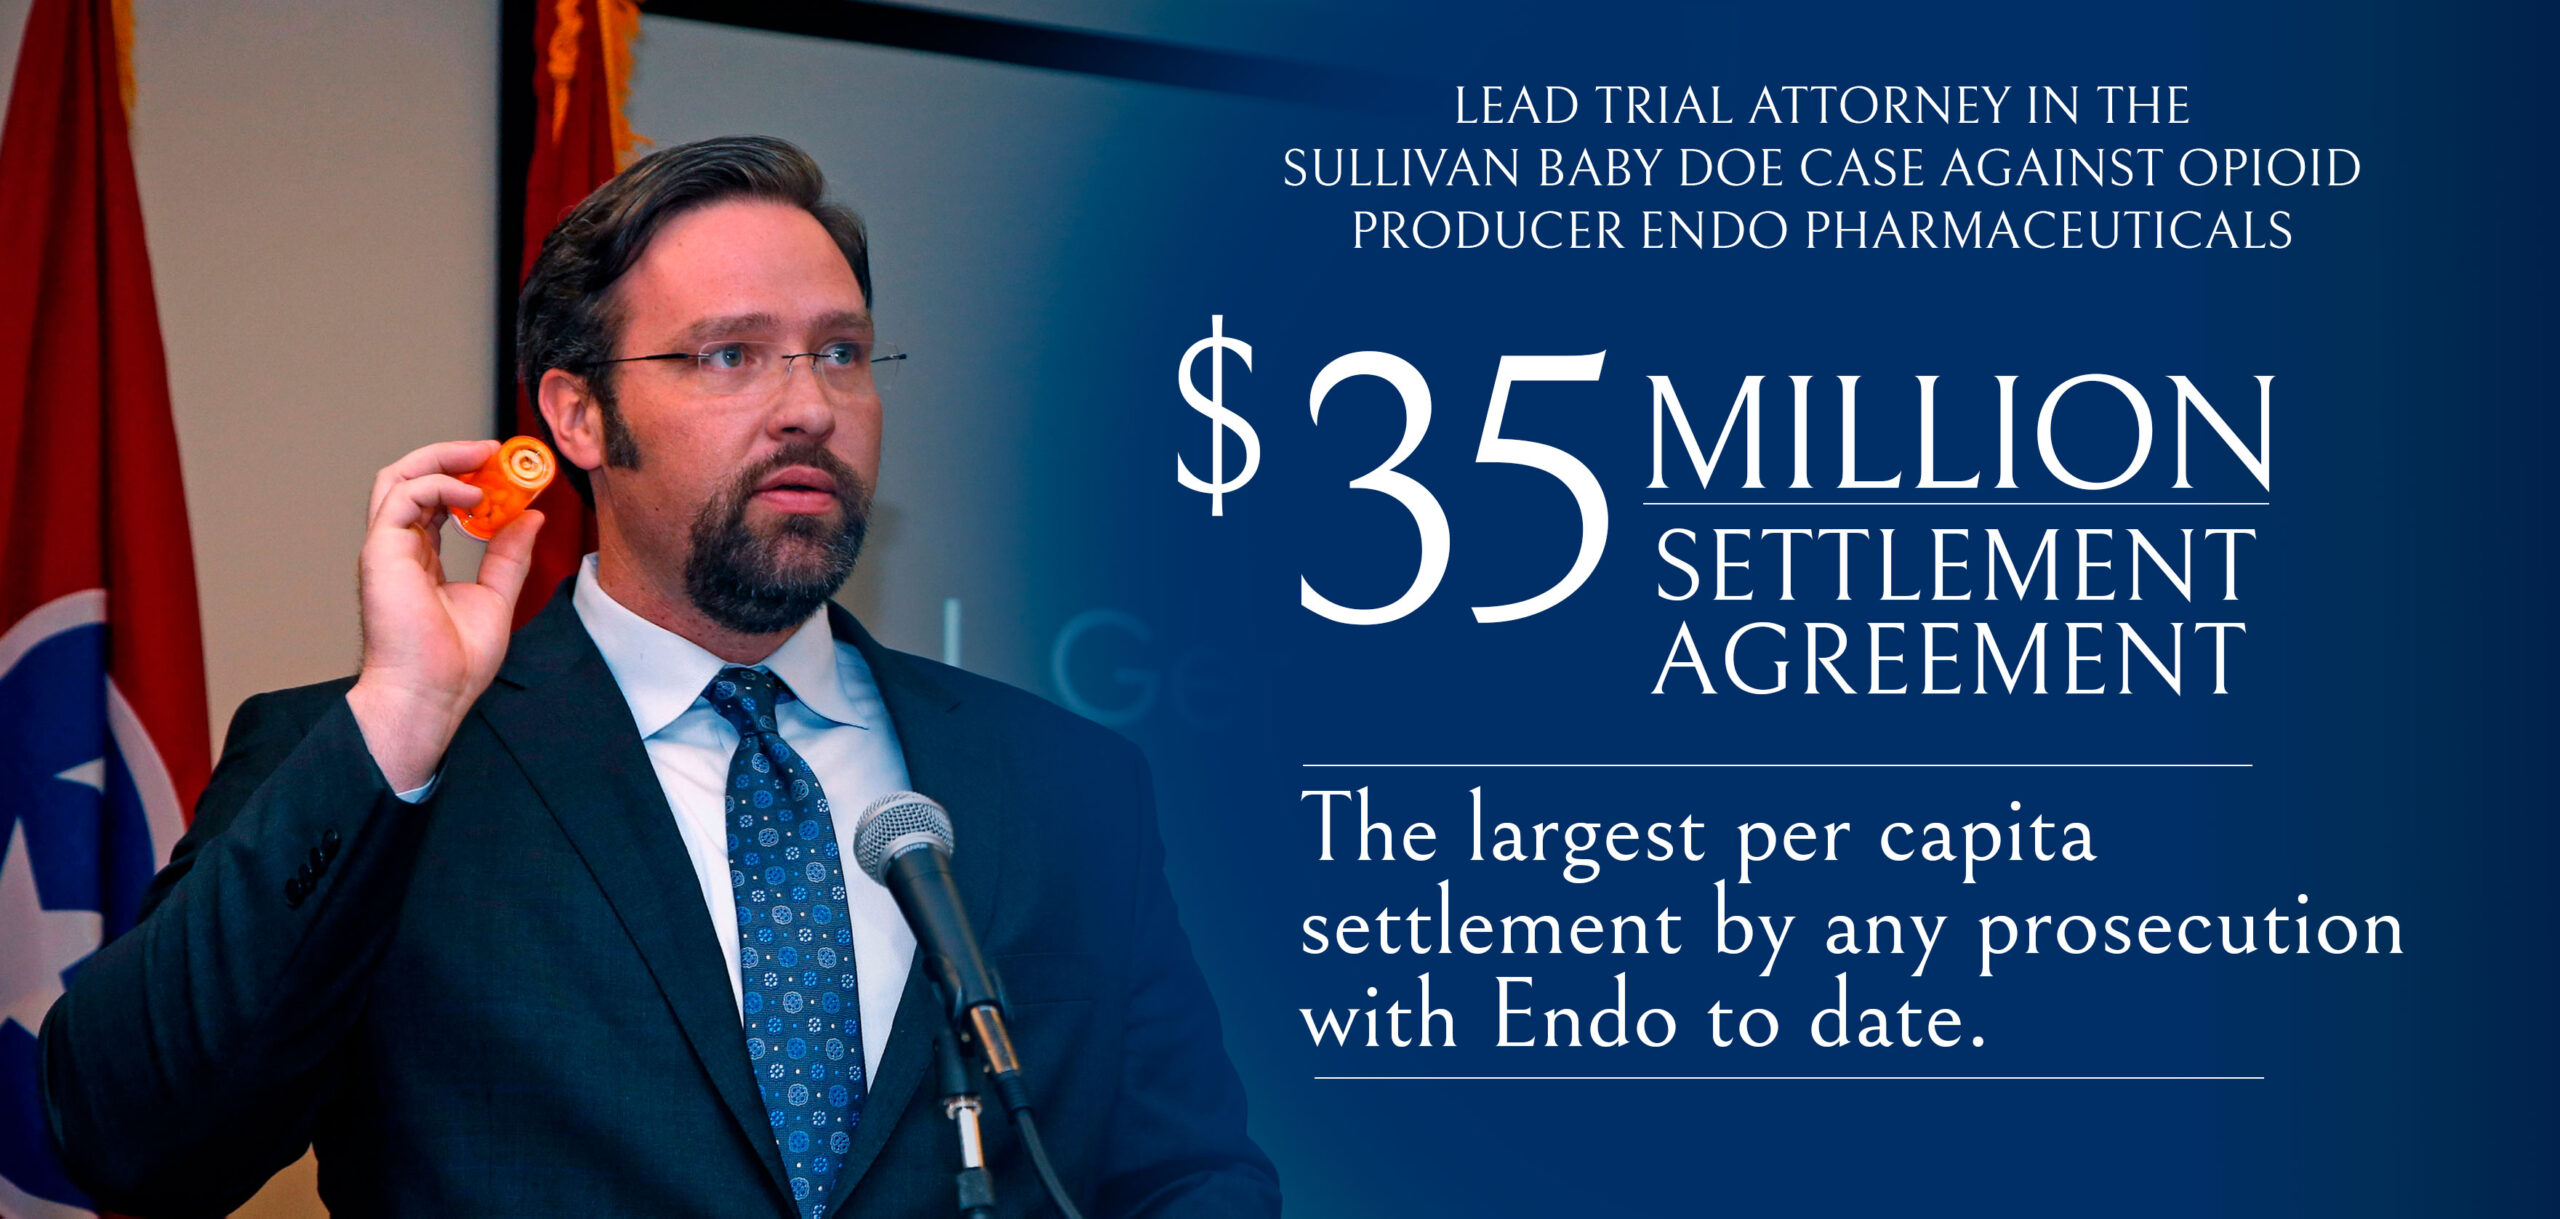 Lead Trial Attorney in the Sullivan Baby Doe Case against Opioid Producer Endo Pharmaceuticals - $35 Million Settlement Agreement - The largest per capita settlement by any prosecution with Endo to date.